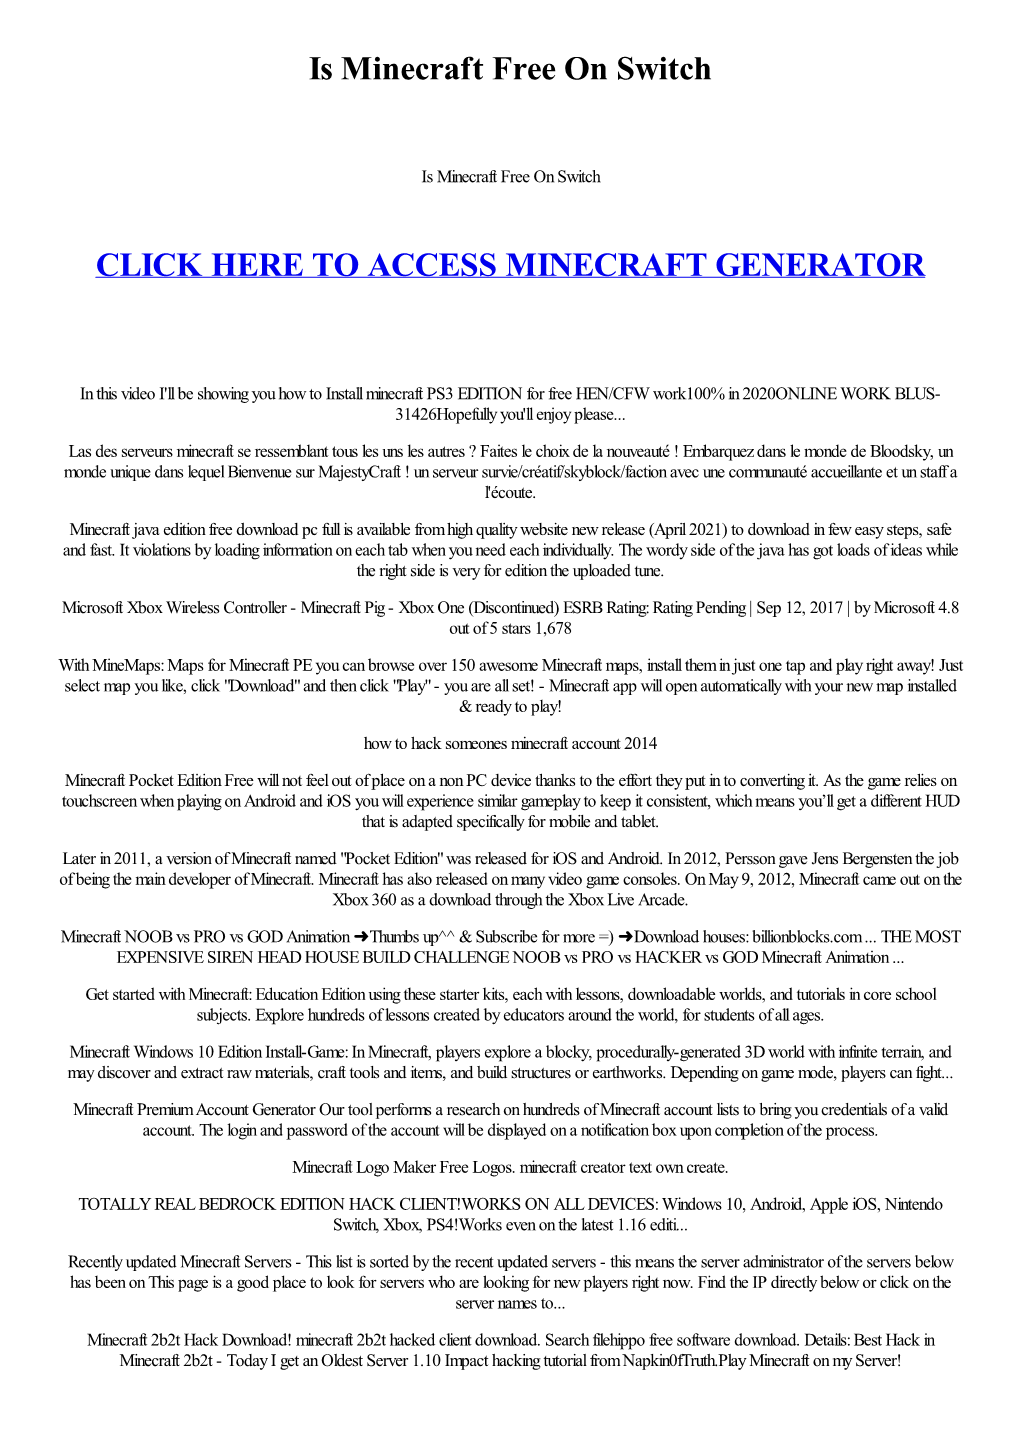 Is Minecraft Free on Switch